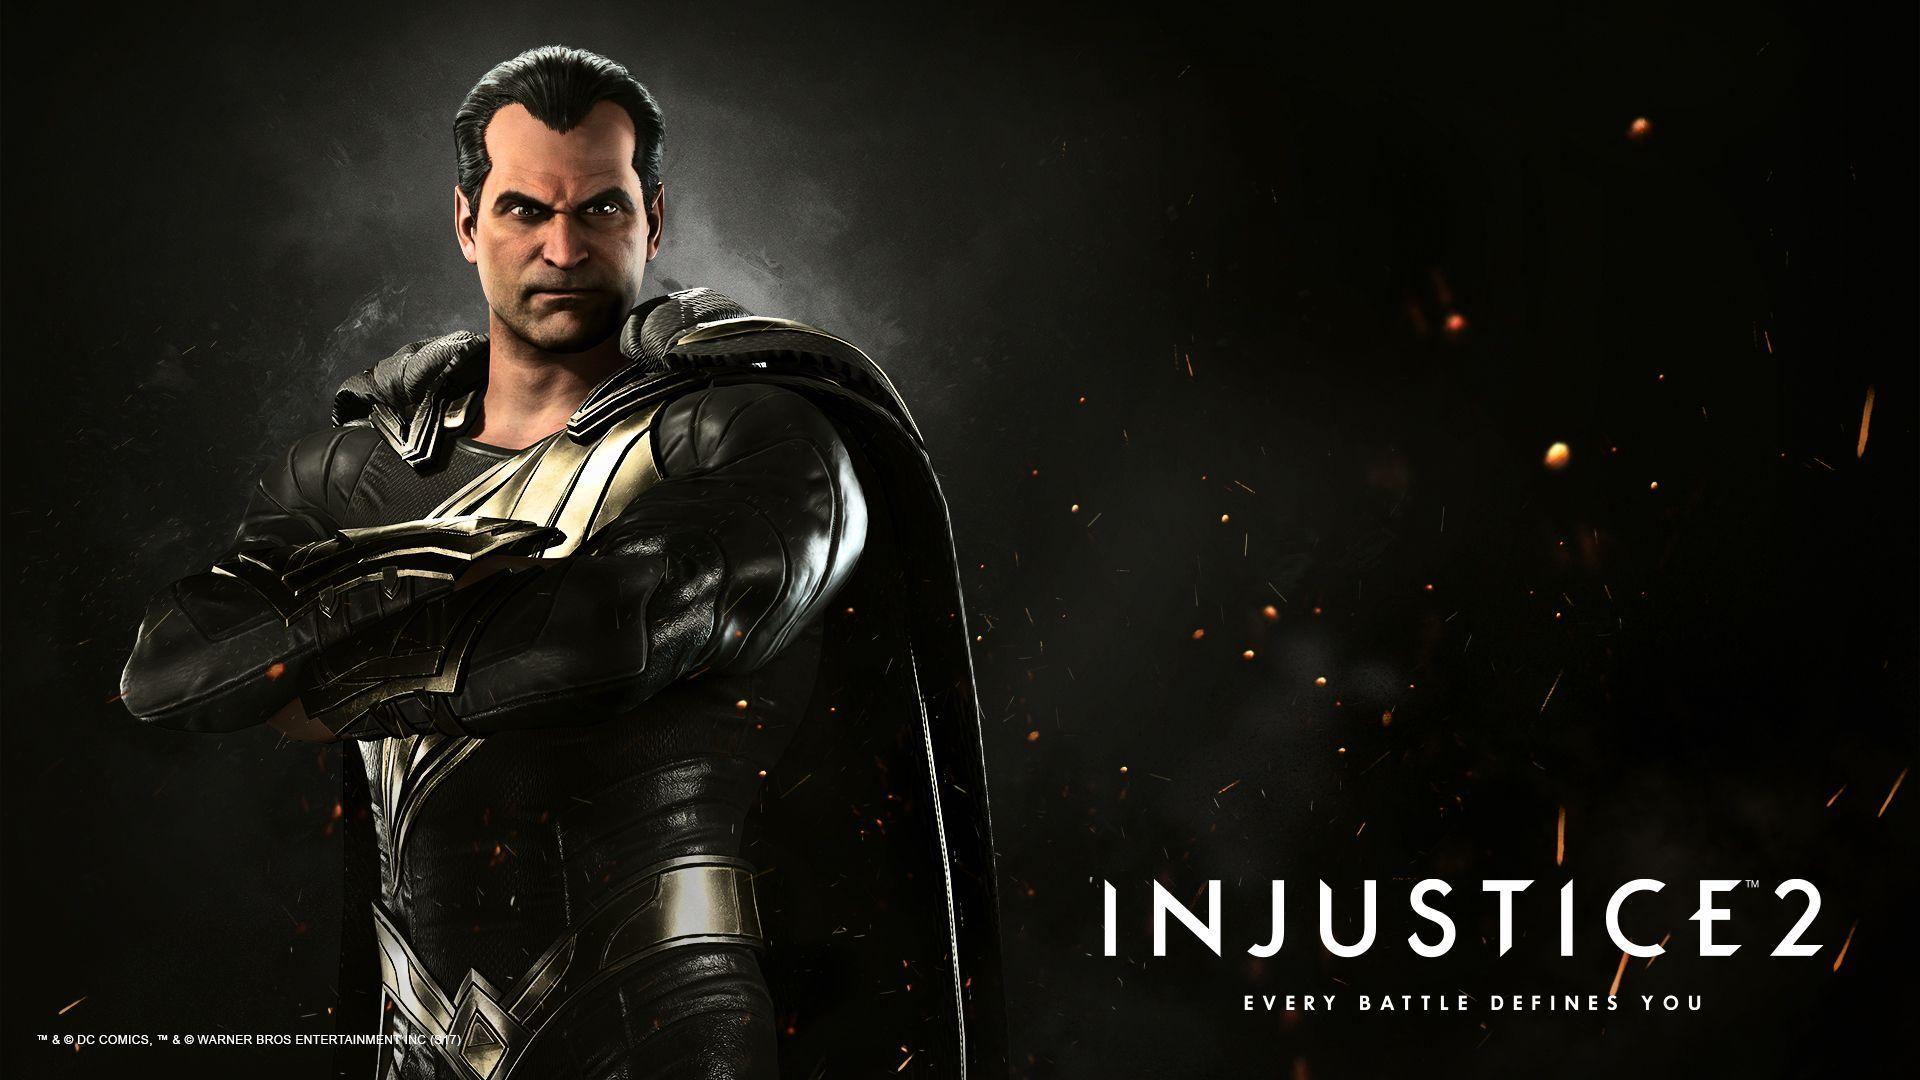 Injustice 2 Injustice 2 characters Injustice 2 game